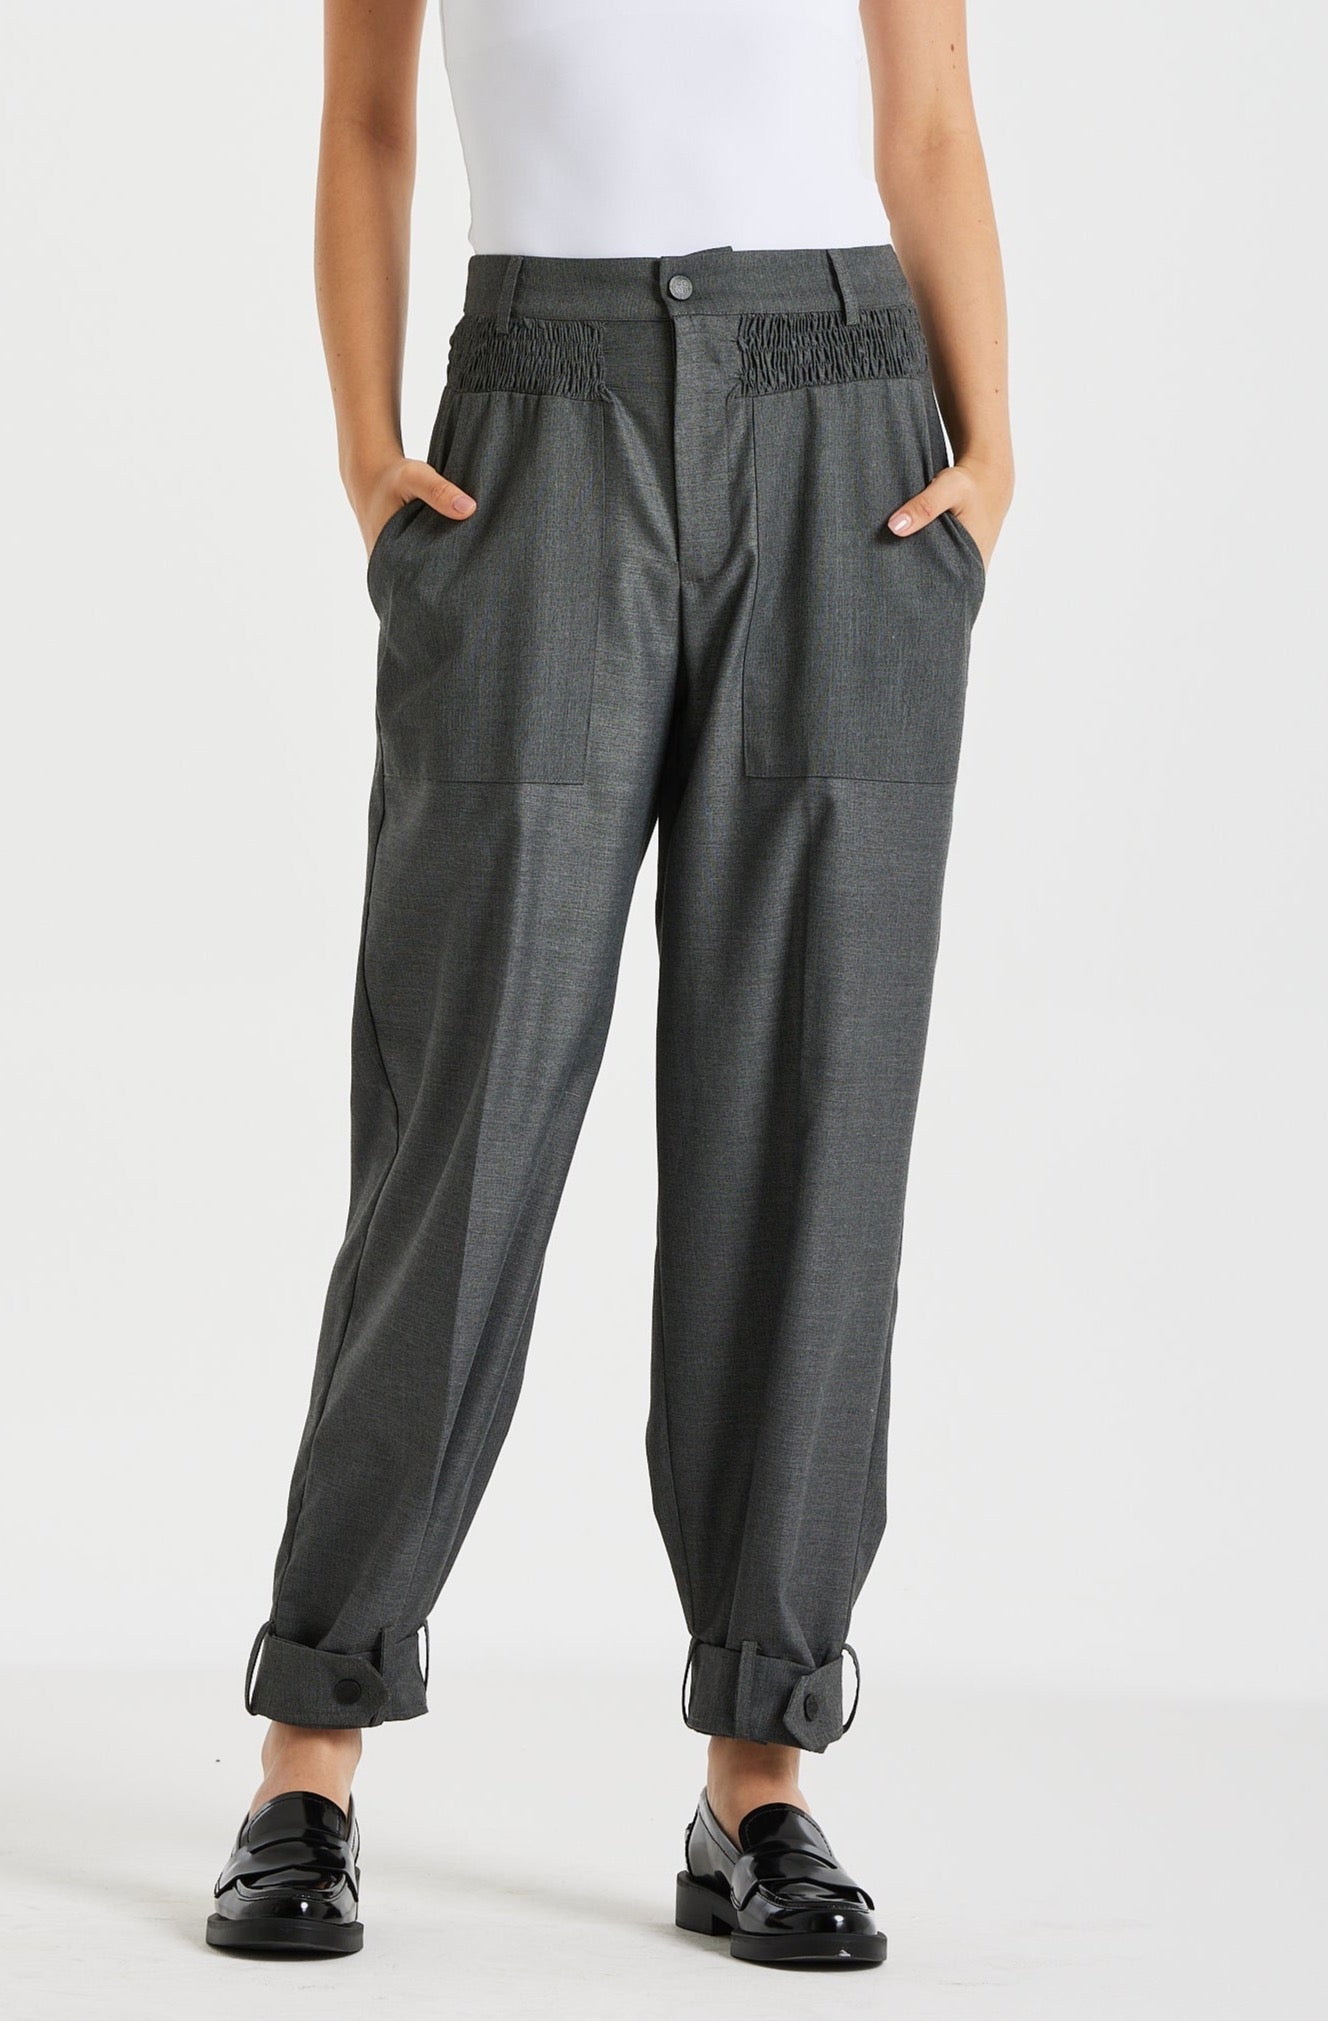 Belted Bottom Legs Suit Pants